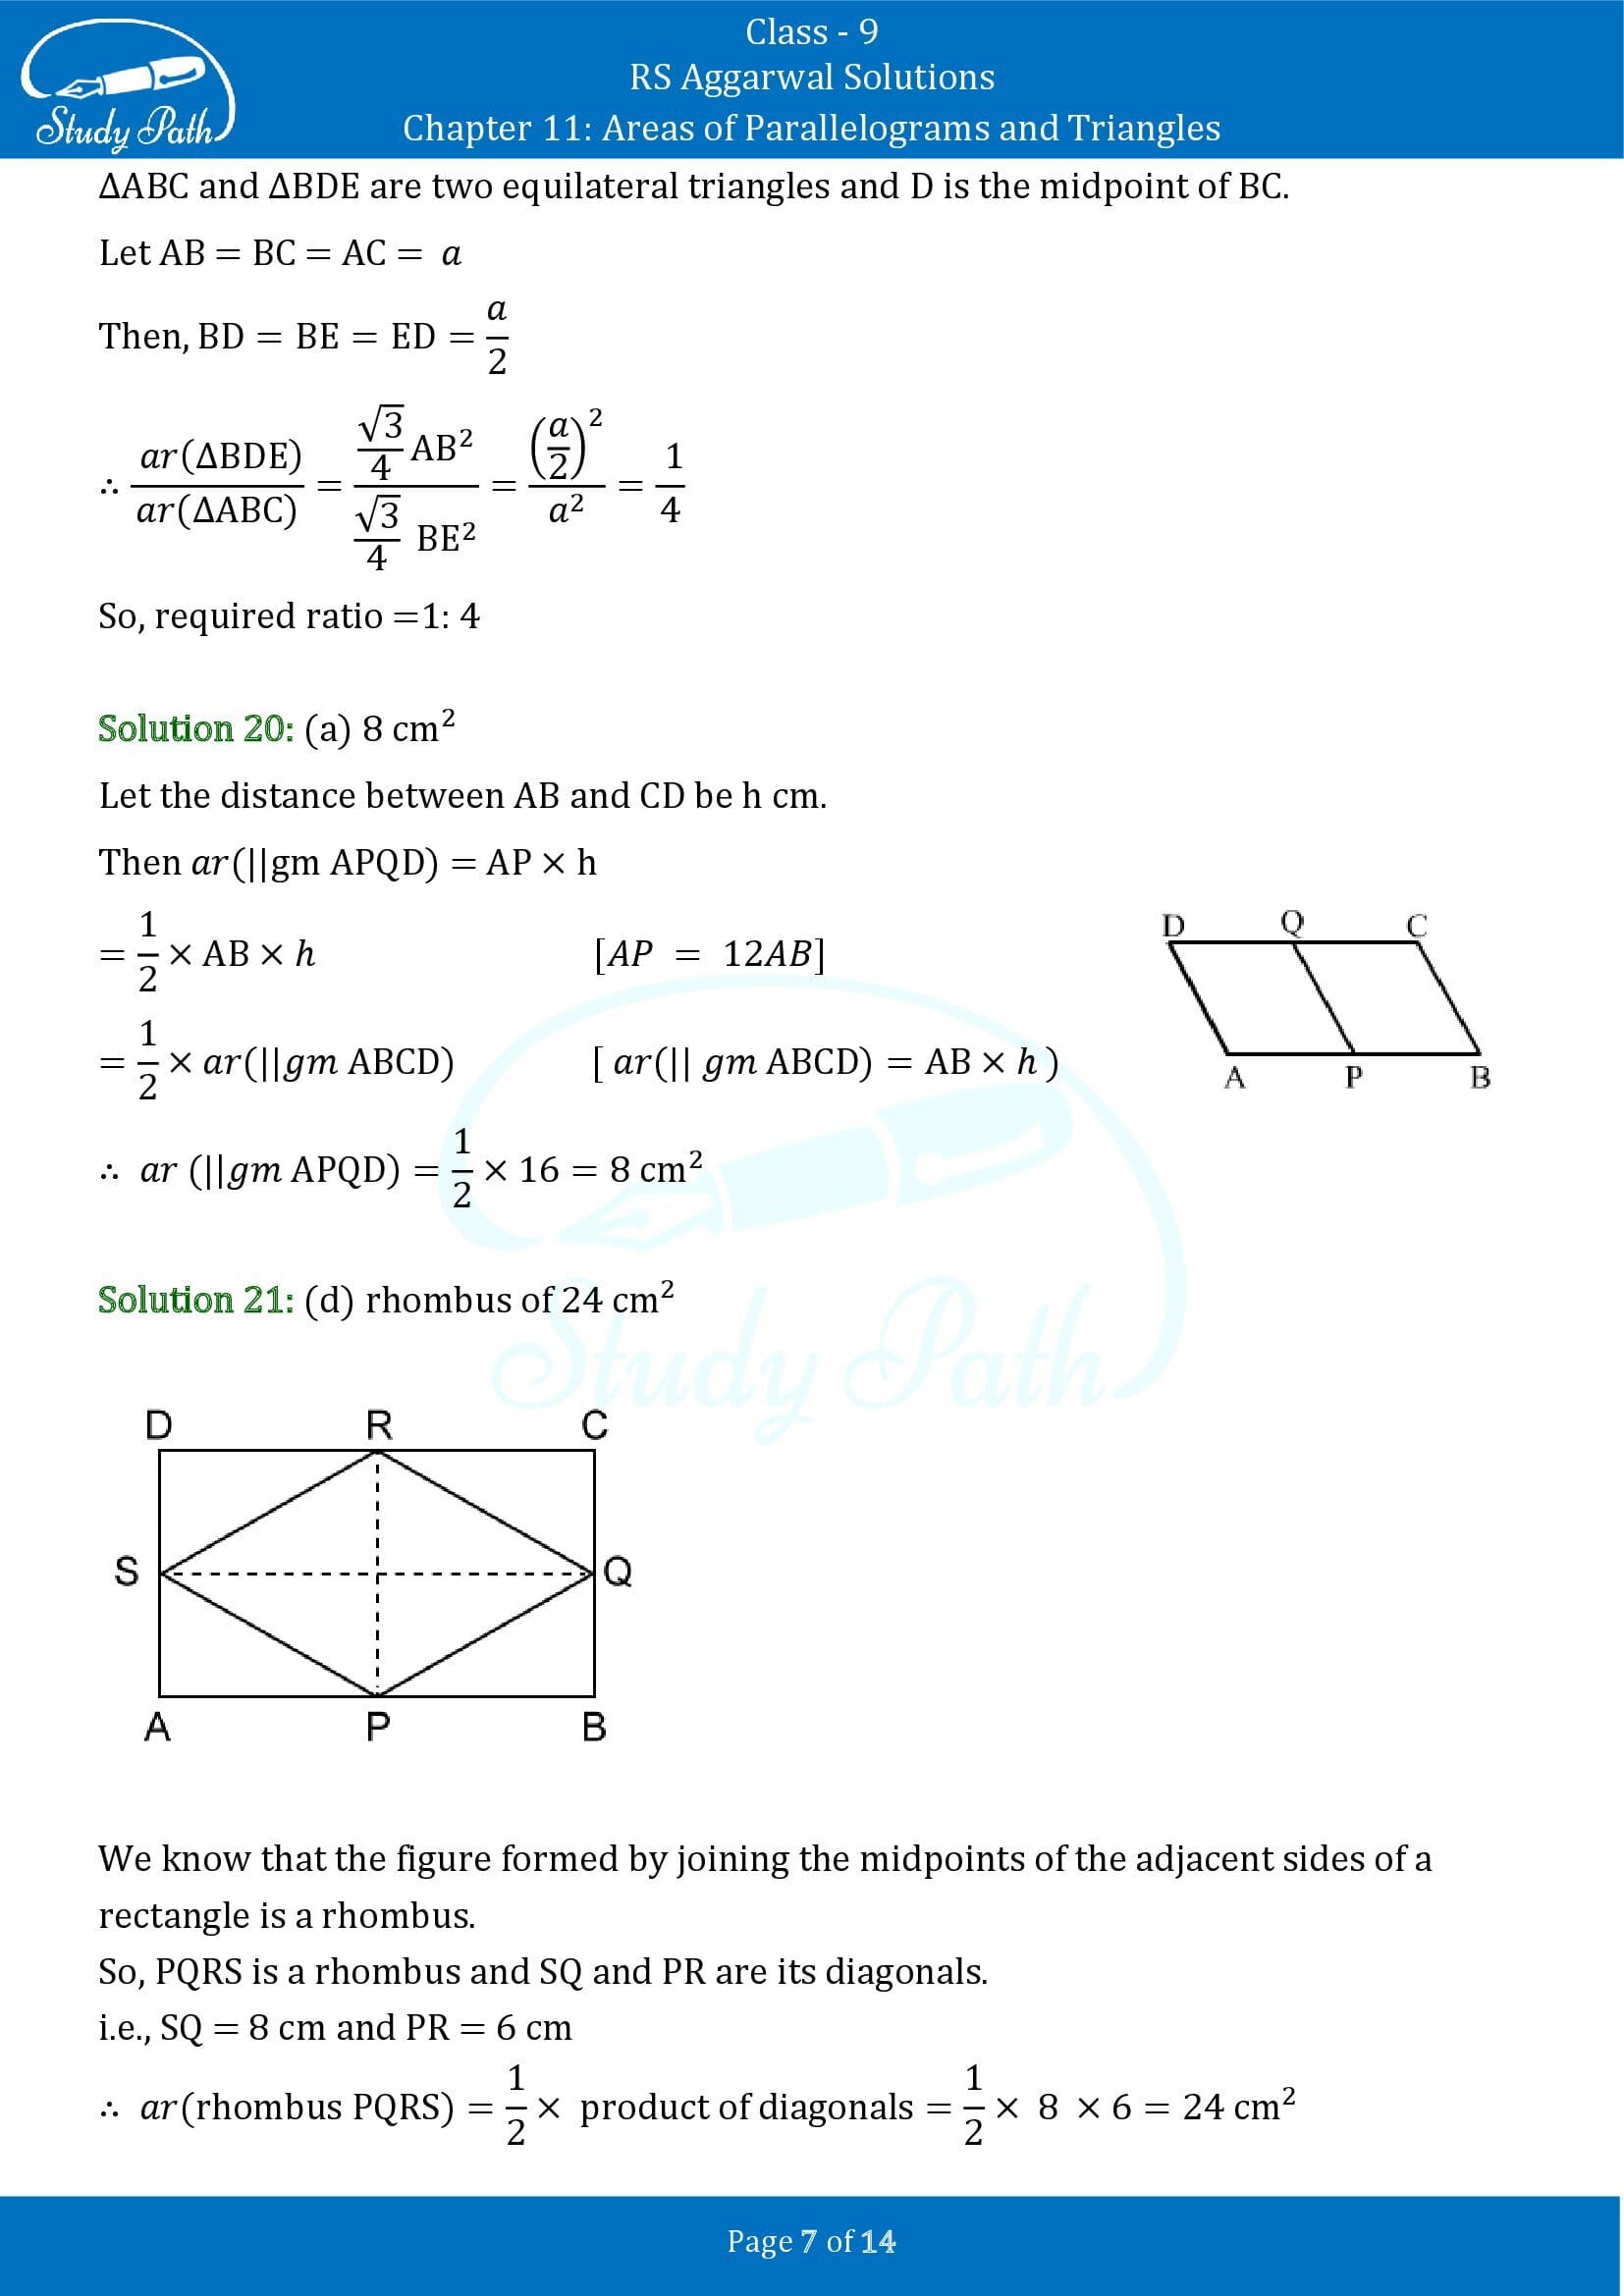 RS Aggarwal Solutions Class 9 Chapter 11 Areas of Parallelograms and Triangles Multiple Choice Questions MCQs 00007